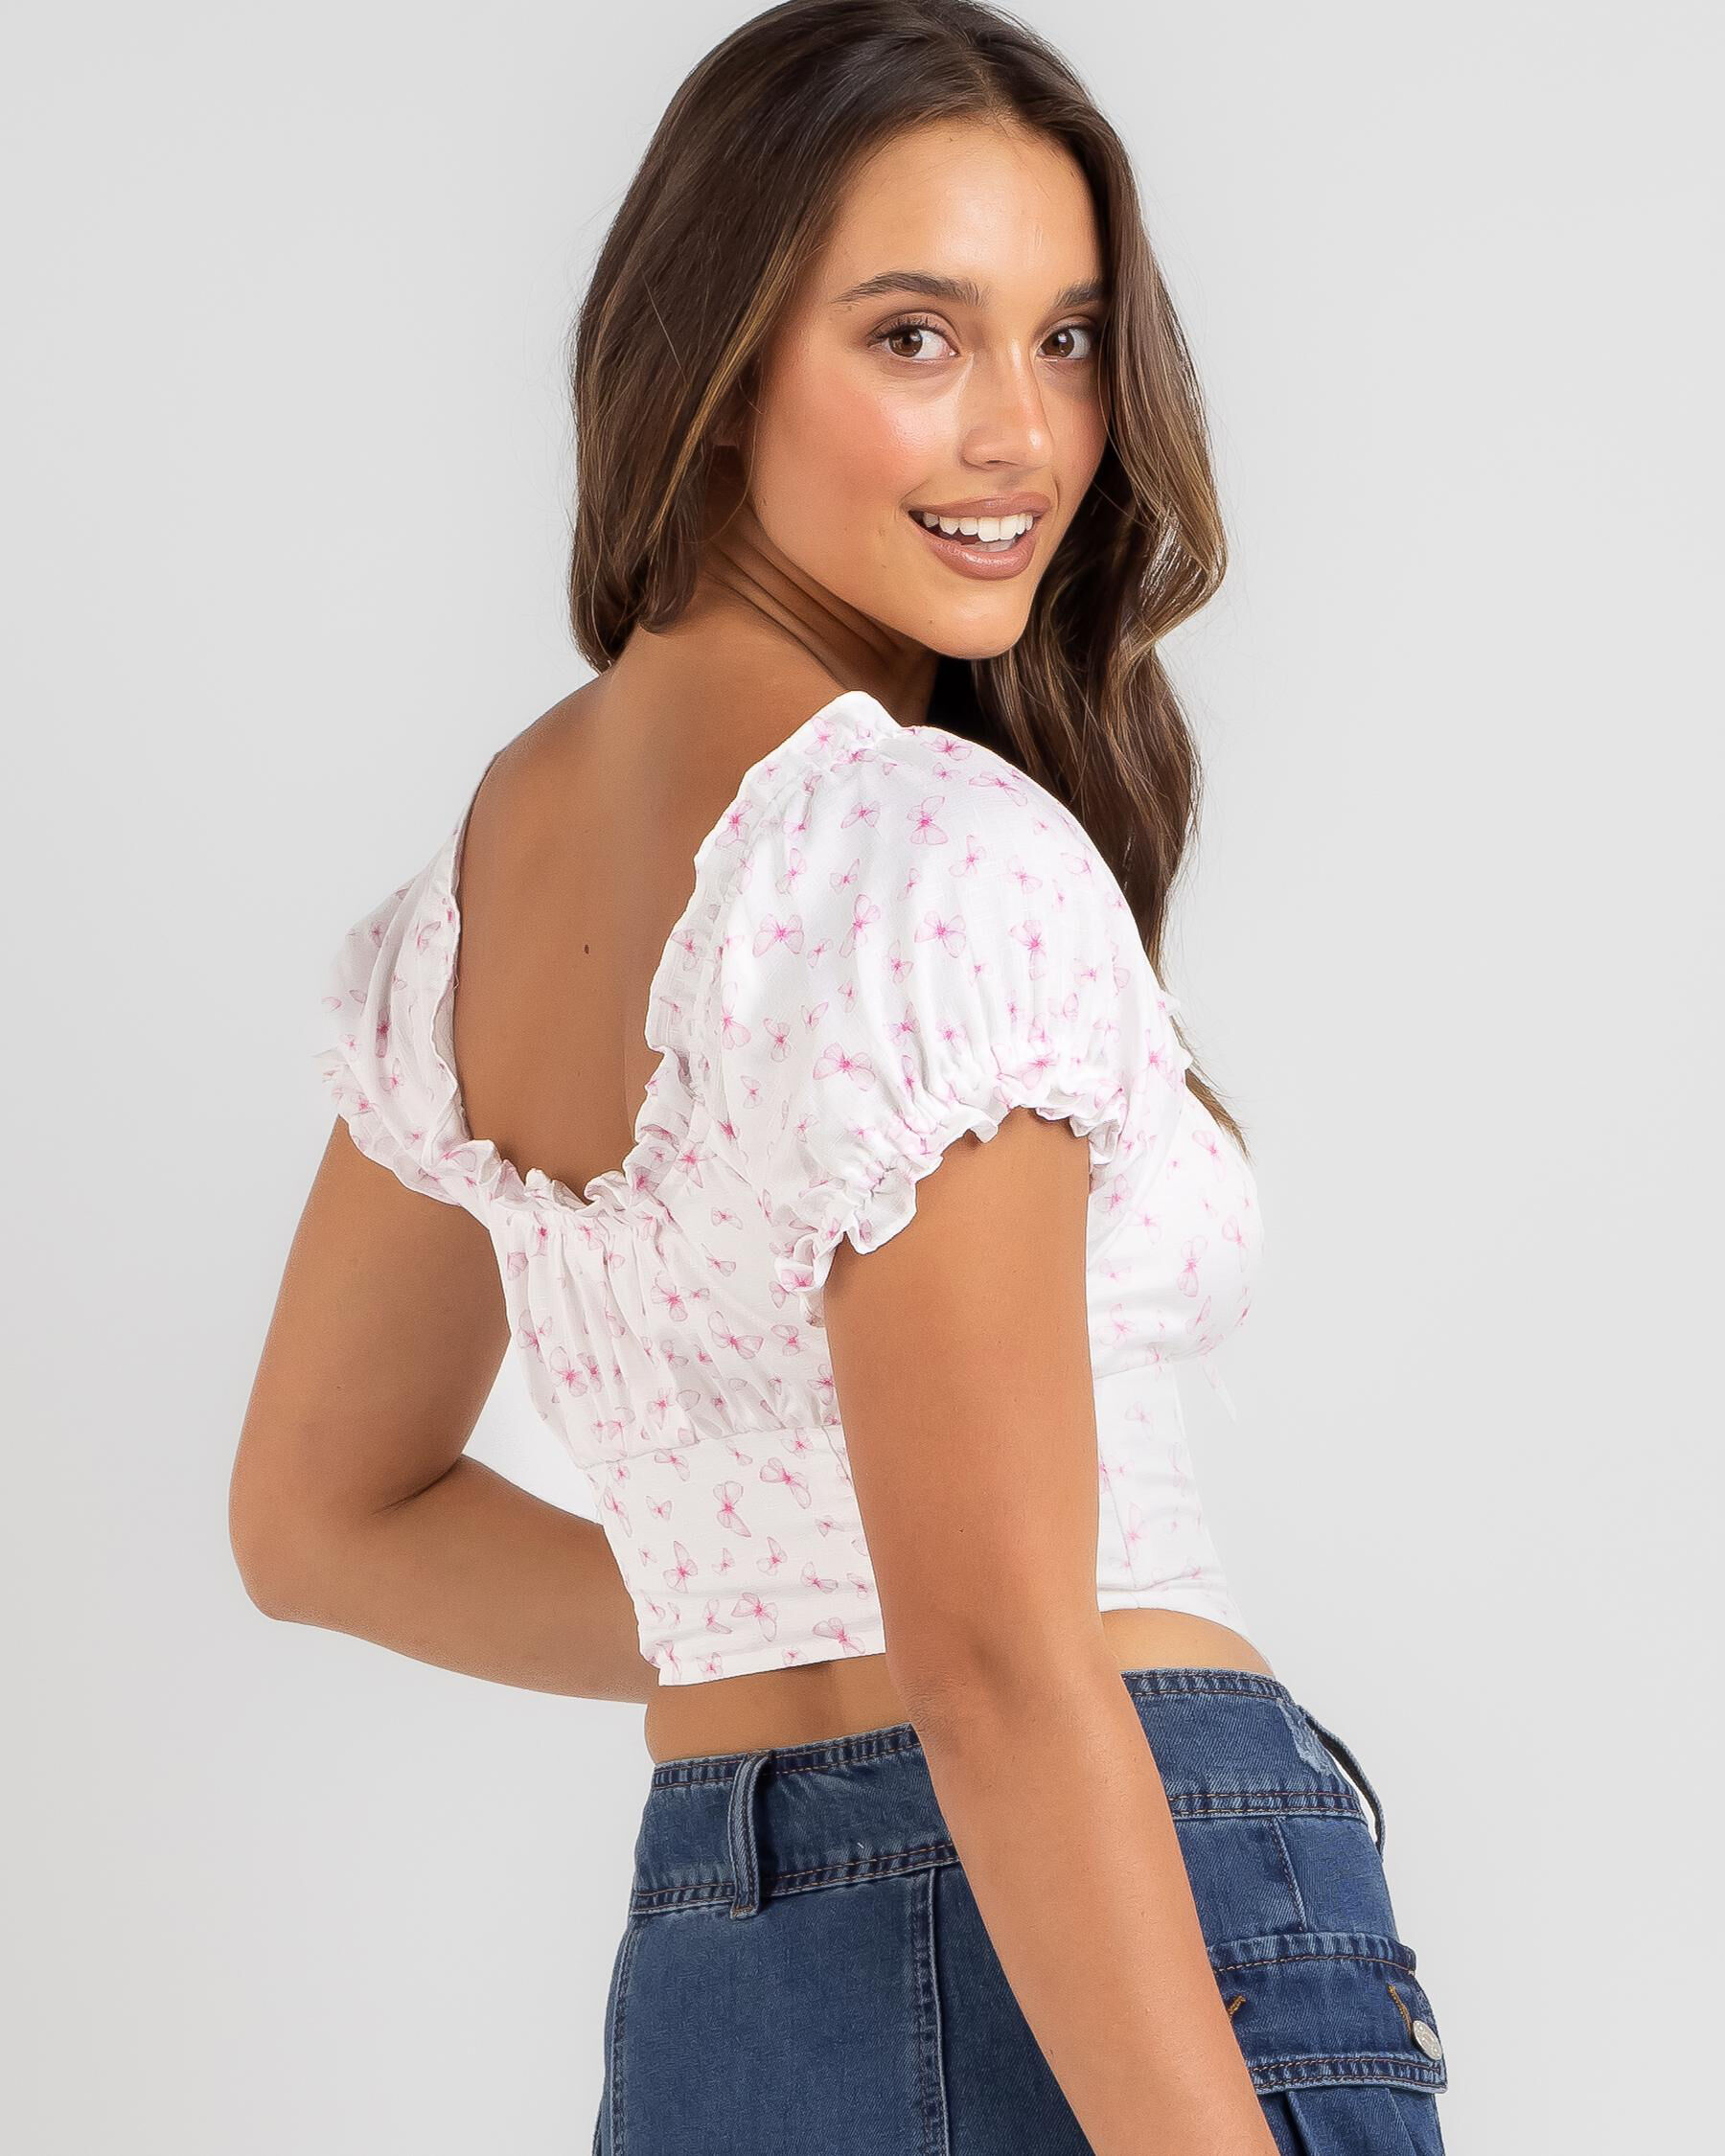 Fresh United States Mooloola Top Sellers Kylie Corset Top Styles on Offer